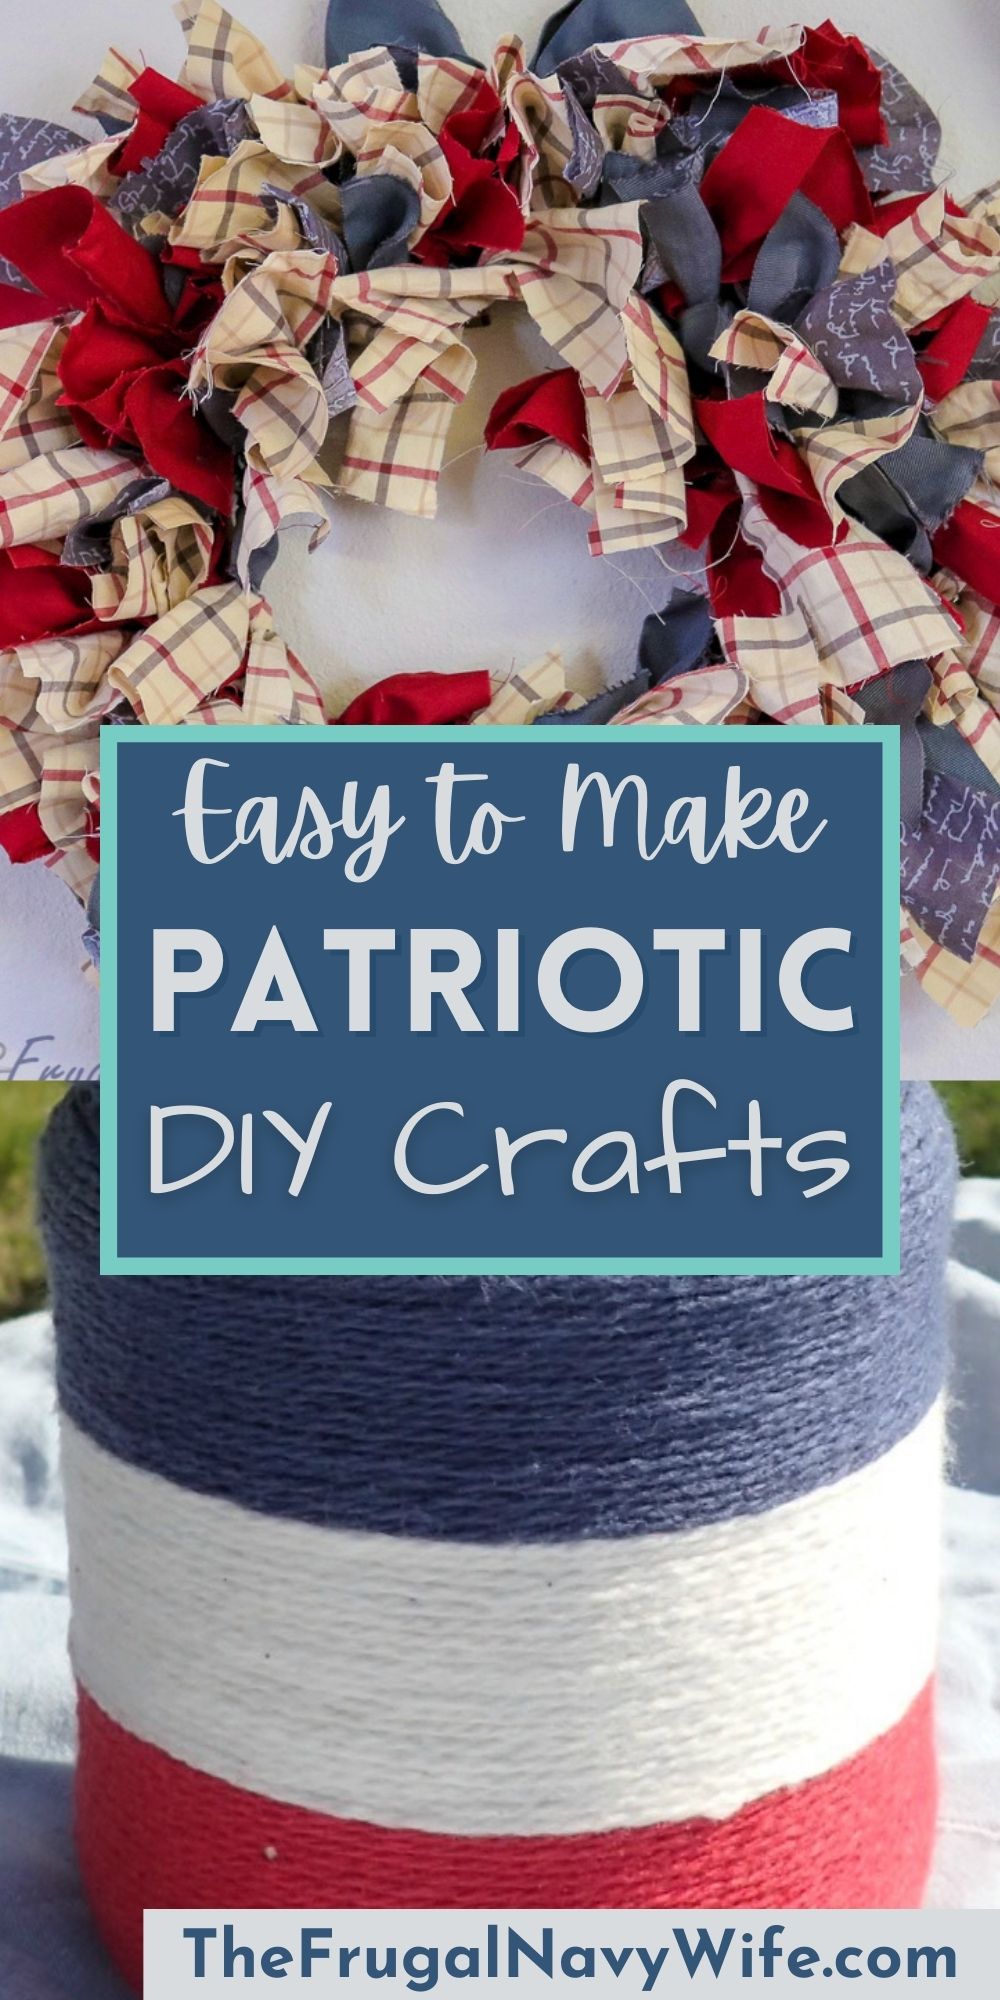 Easy to Make Patriotic DIY Crafts - The Frugal Navy Wife